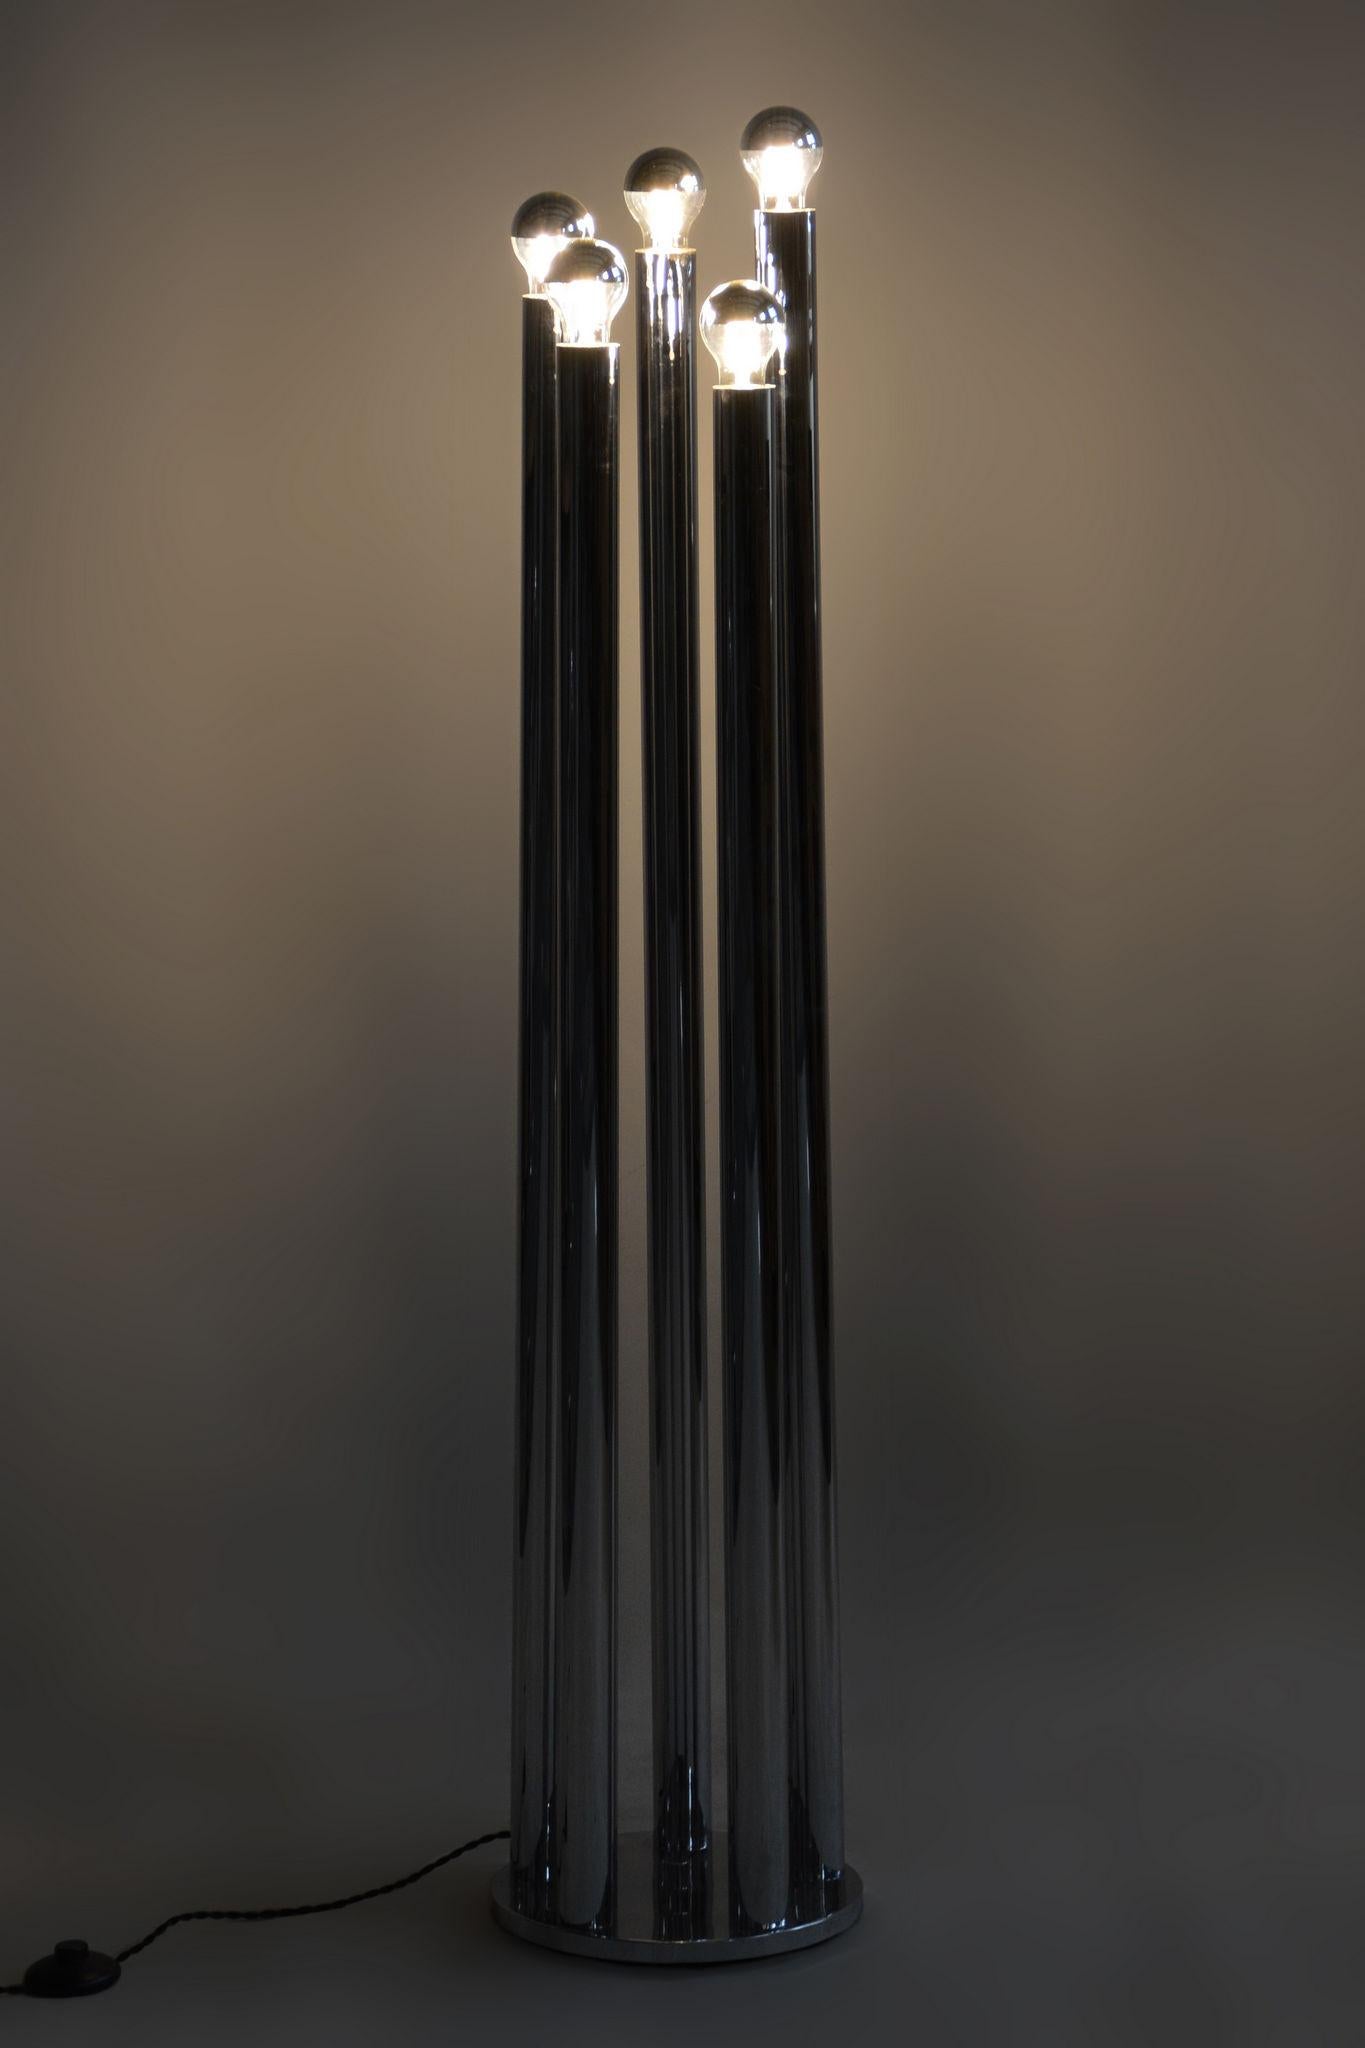 Restored Bauhaus Floor Lamp with Unusual Design. New Electrification.

Material: Chrome-plated Steel
Source: France
Period: 1950-1959

The chrome parts have been cleaned and professionally restored. 

This item features classic Bauhaus design